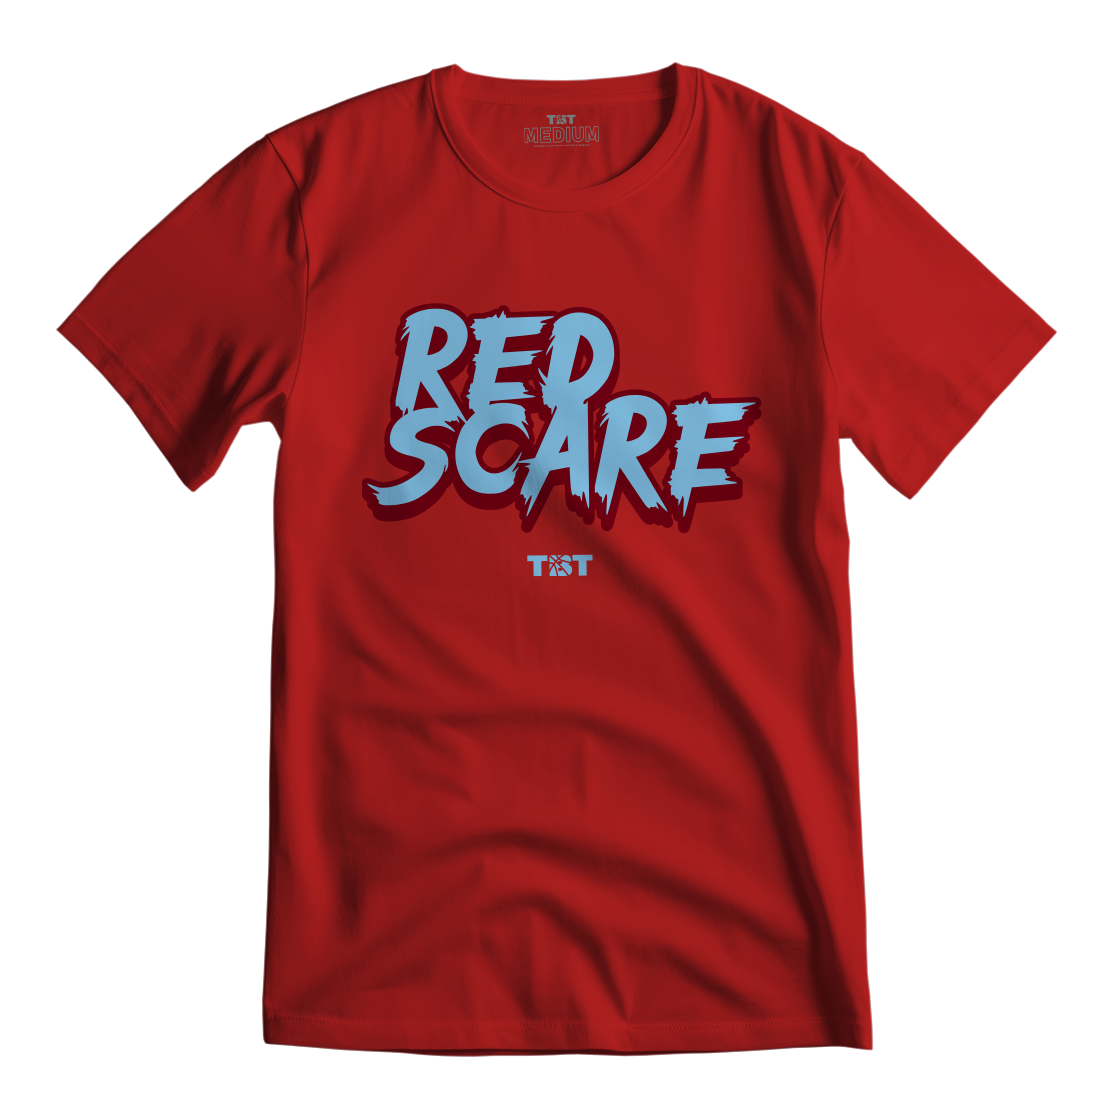 RED SCARE SCRATCH TSHIRT